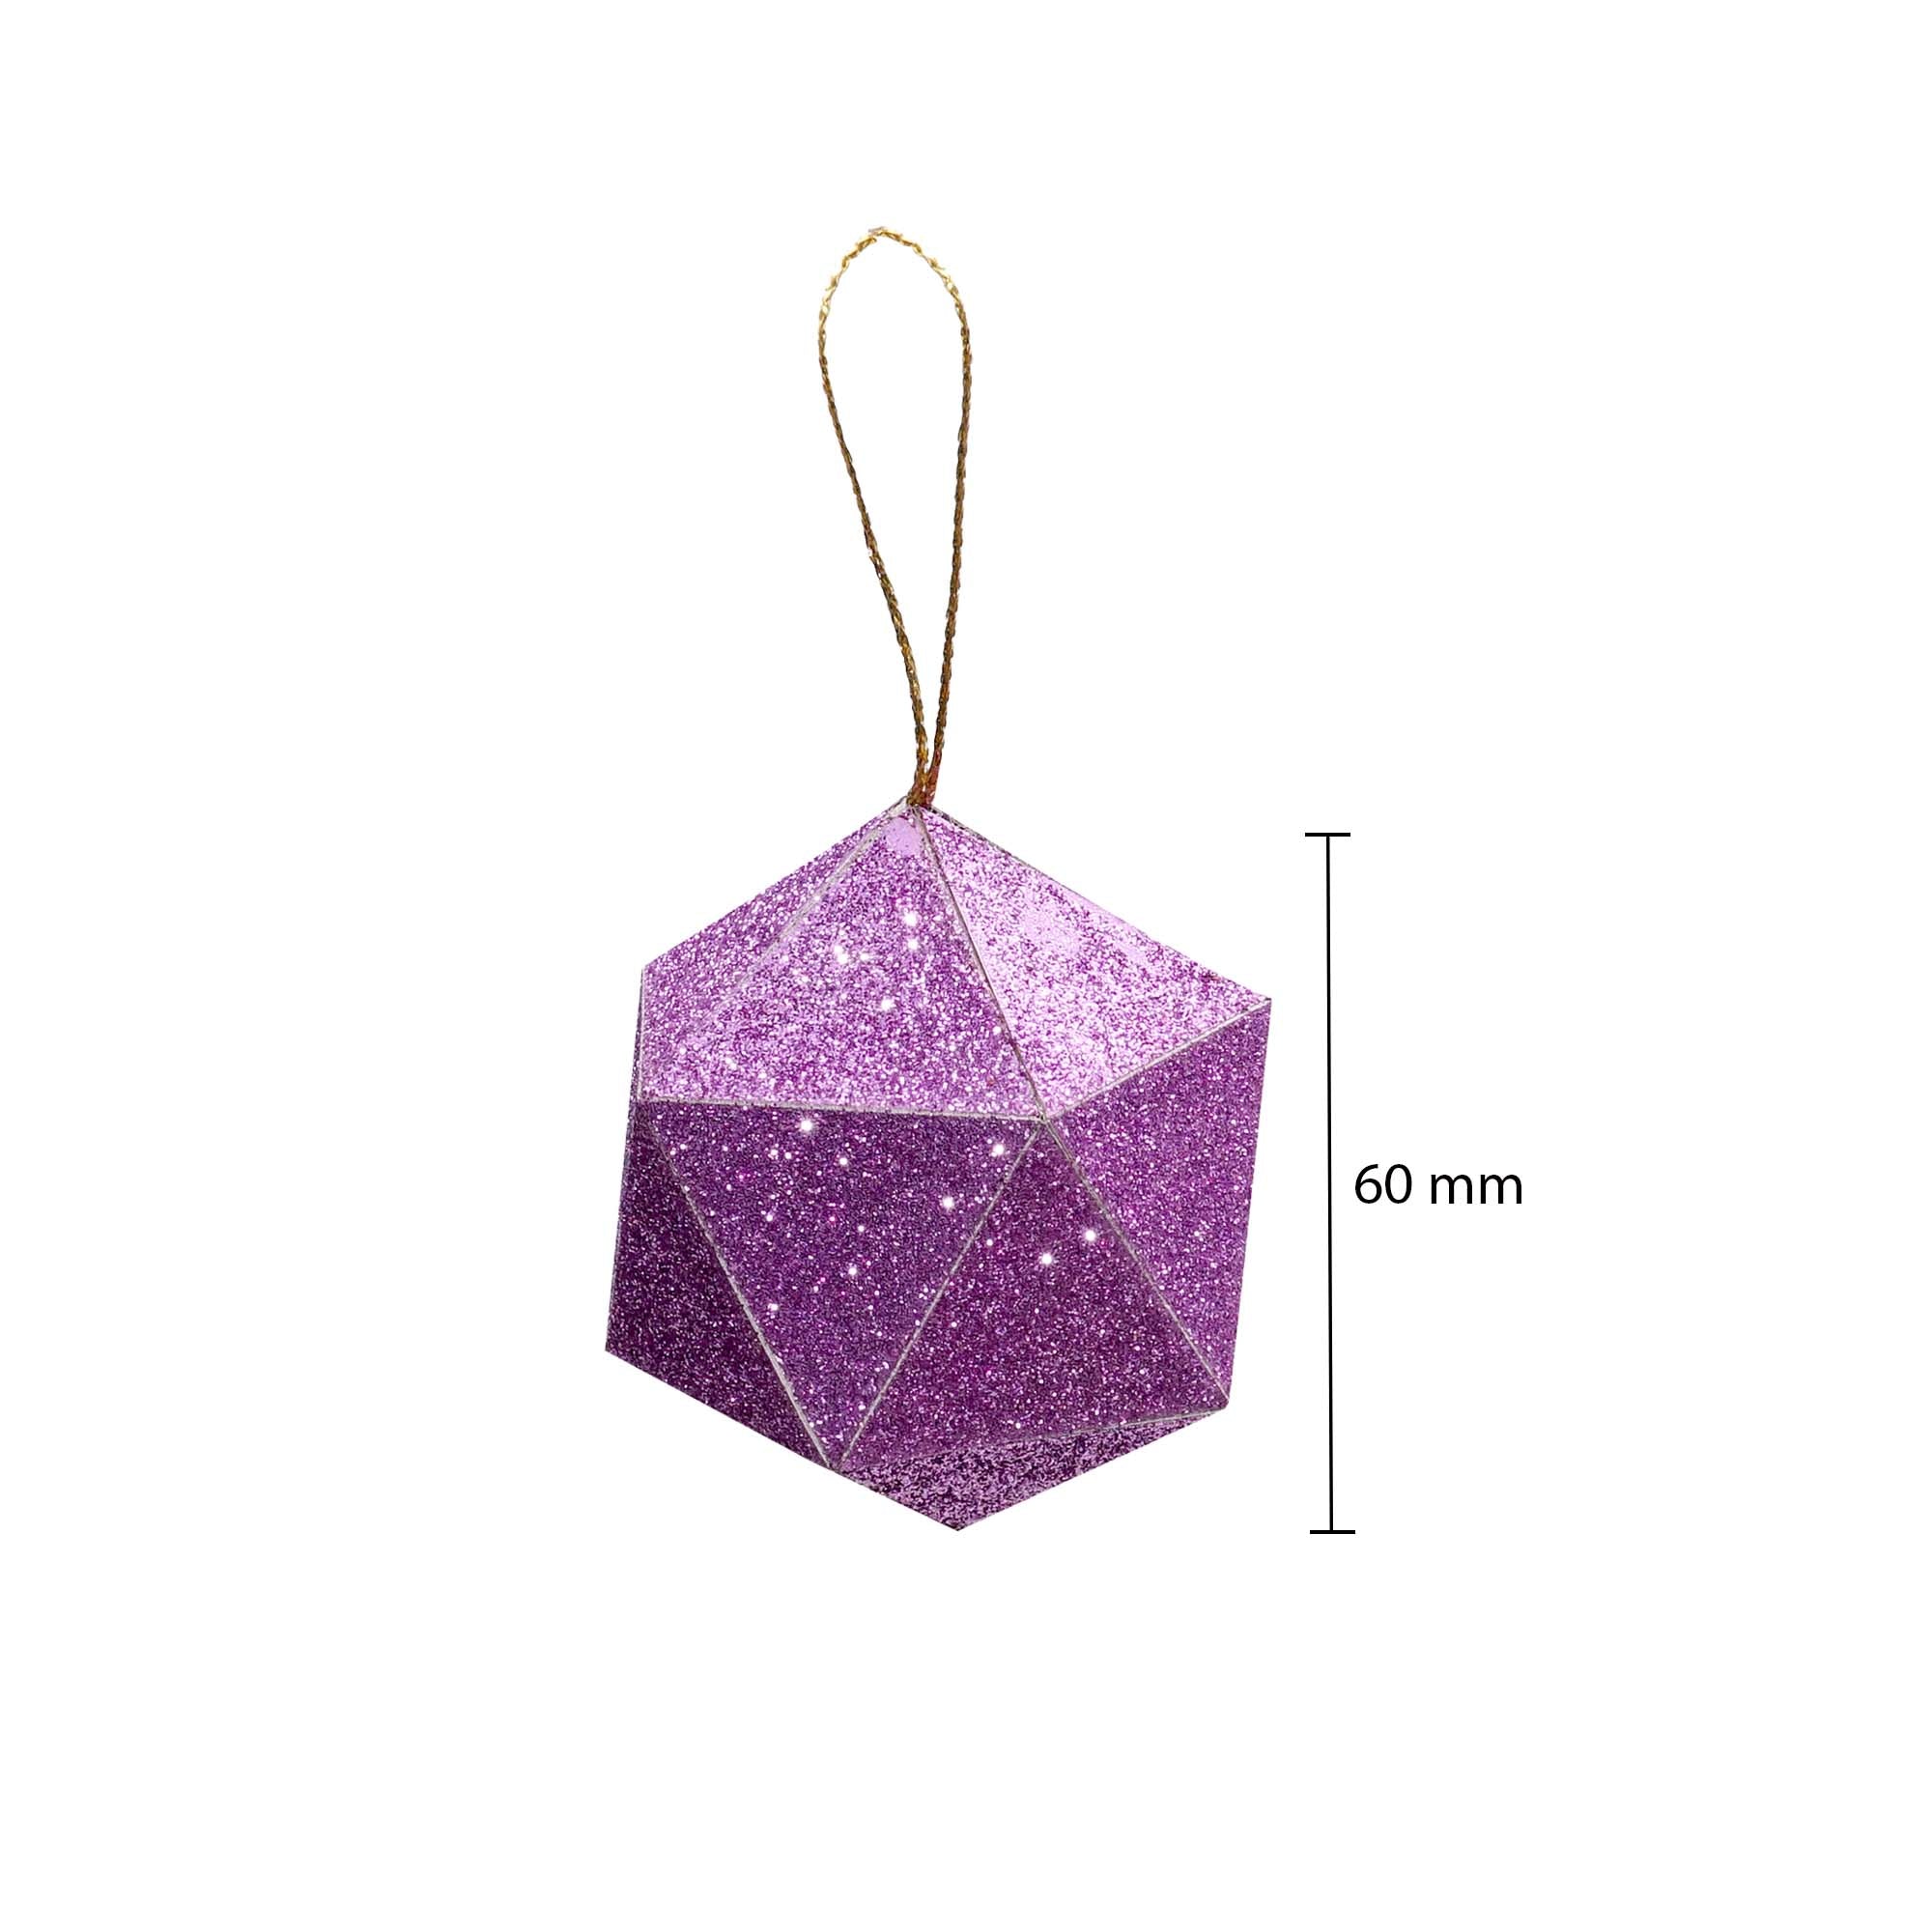 Handmade Christmas Trapezoid Hanging Glitter Ornaments, 60mm, Assorted Colours - Blue, Purple, Silver, Pink, 6pc